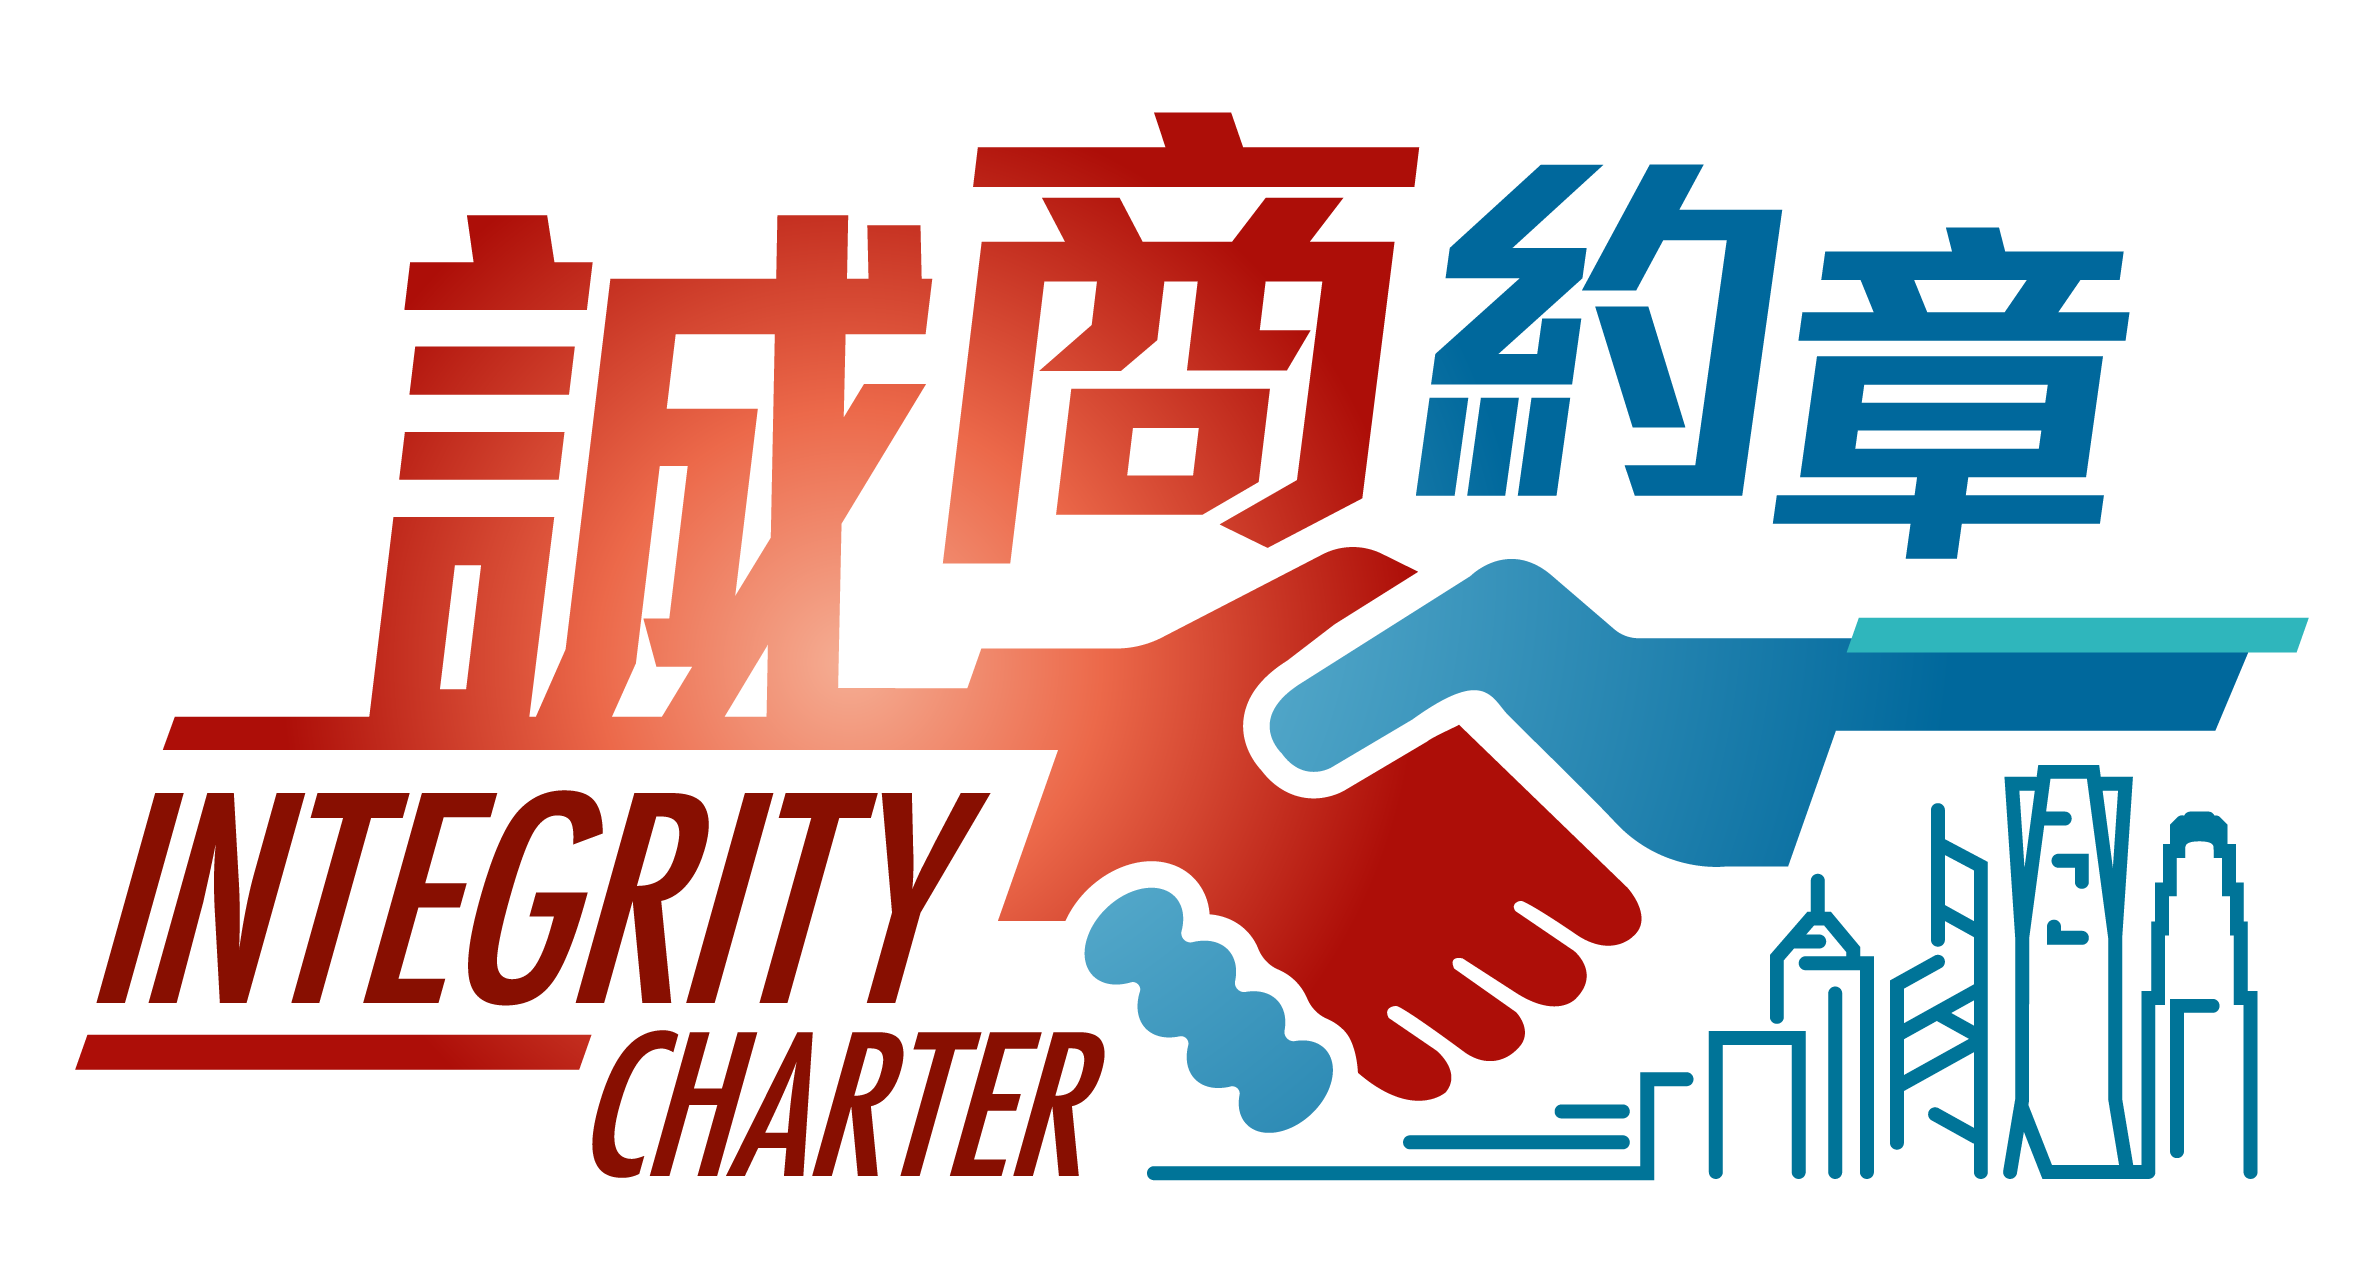 GUIDELINE ON THE USE OF BUSINESS SECTOR INTEGRITY CHARTER LOGO